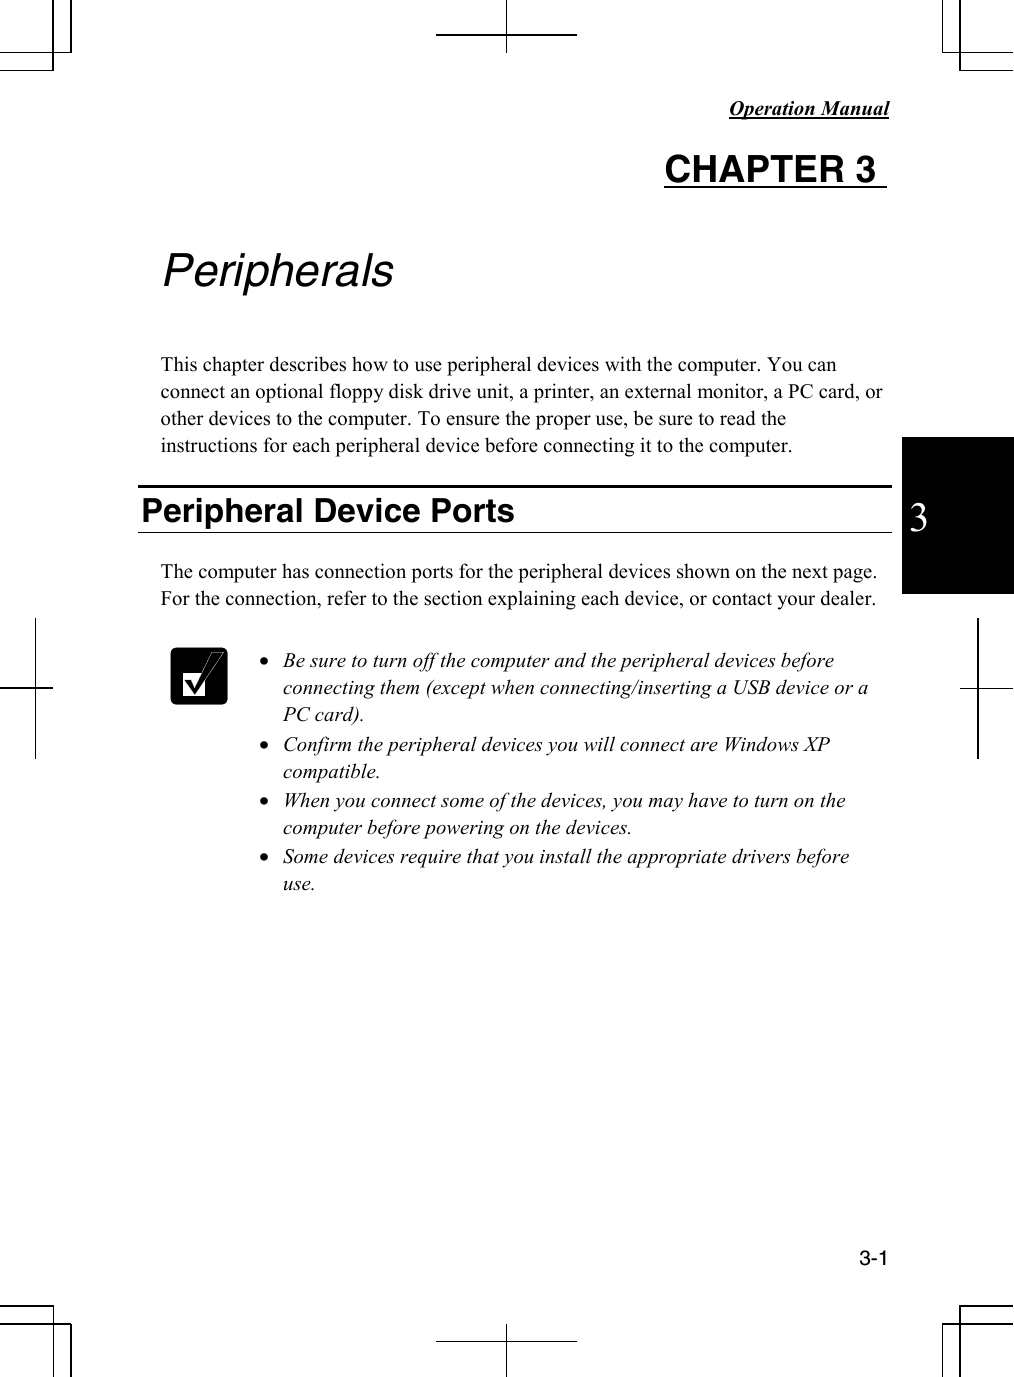   Operation Manual     3-1 3 CHAPTER 3    Peripherals  This chapter describes how to use peripheral devices with the computer. You can connect an optional floppy disk drive unit, a printer, an external monitor, a PC card, or other devices to the computer. To ensure the proper use, be sure to read the instructions for each peripheral device before connecting it to the computer.  Peripheral Device Ports  The computer has connection ports for the peripheral devices shown on the next page. For the connection, refer to the section explaining each device, or contact your dealer.    • Be sure to turn off the computer and the peripheral devices before connecting them (except when connecting/inserting a USB device or a PC card). • Confirm the peripheral devices you will connect are Windows XP compatible. • When you connect some of the devices, you may have to turn on the computer before powering on the devices. • Some devices require that you install the appropriate drivers before use.            